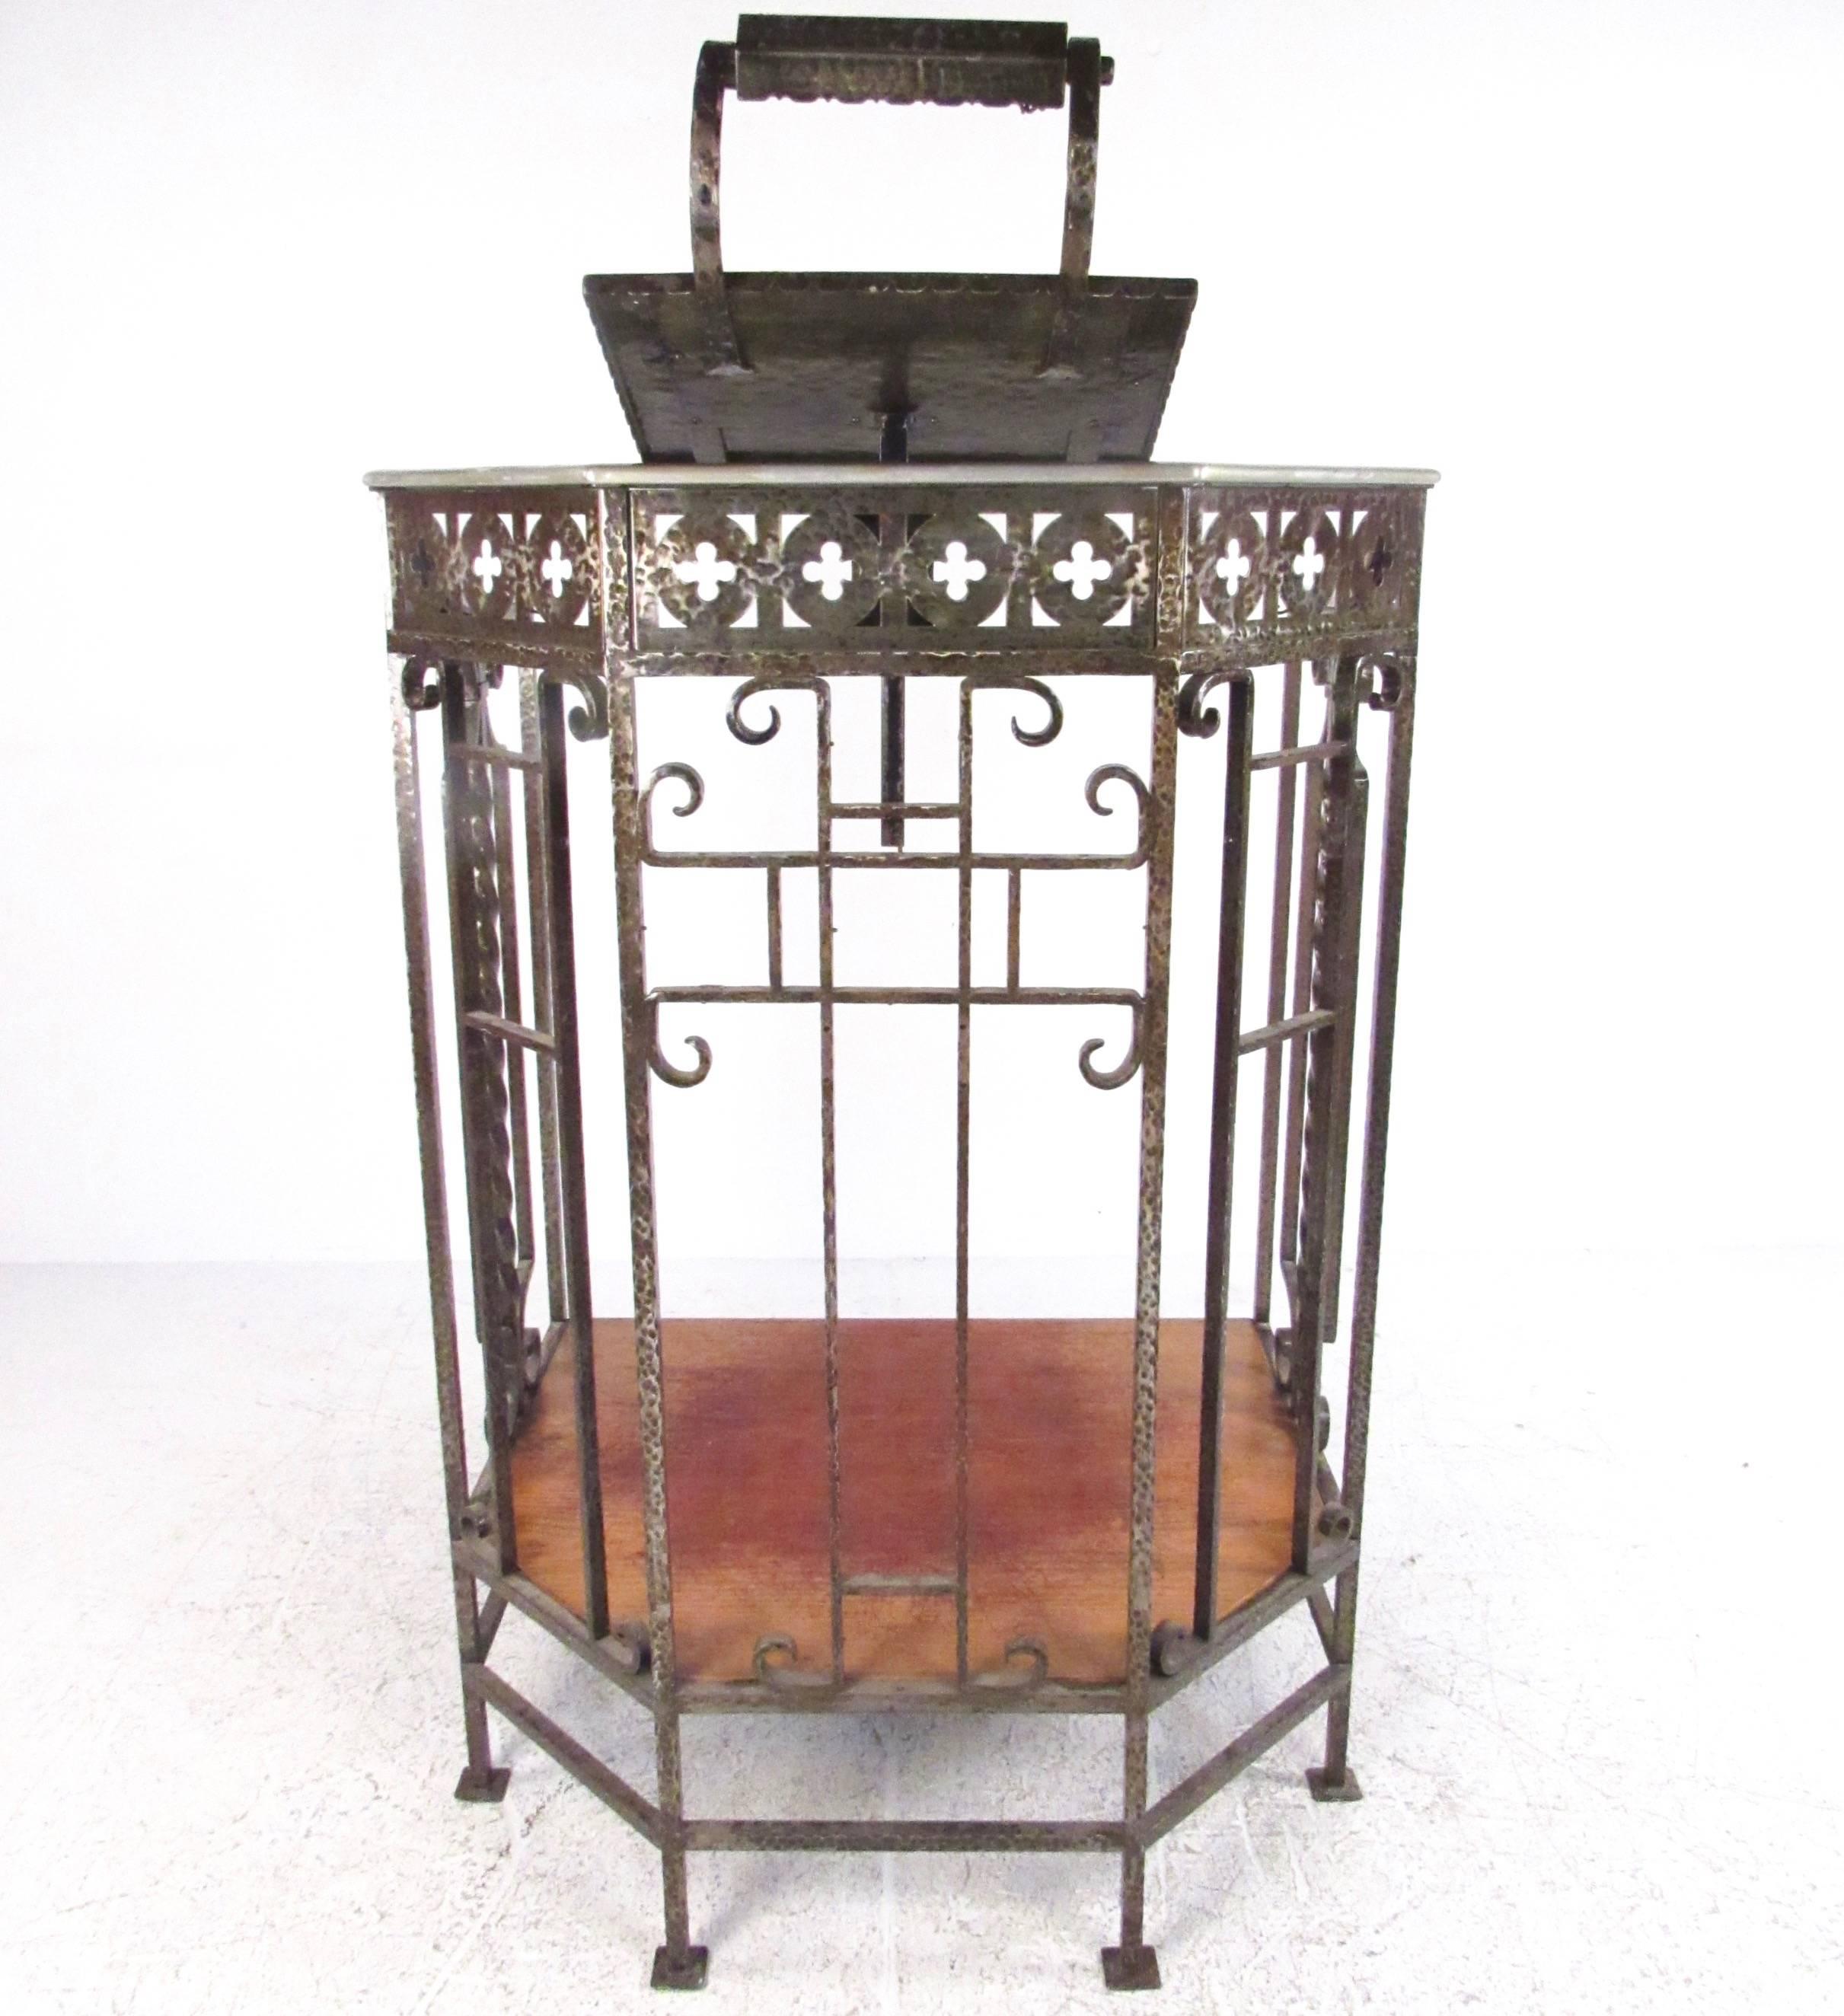 This truly unique cast iron podium features ornate scrolled metal design, removable lectern with light, and hard wood platform with step. This one piece podium was originally used a speaking lectern, but would make an impressive addition to any